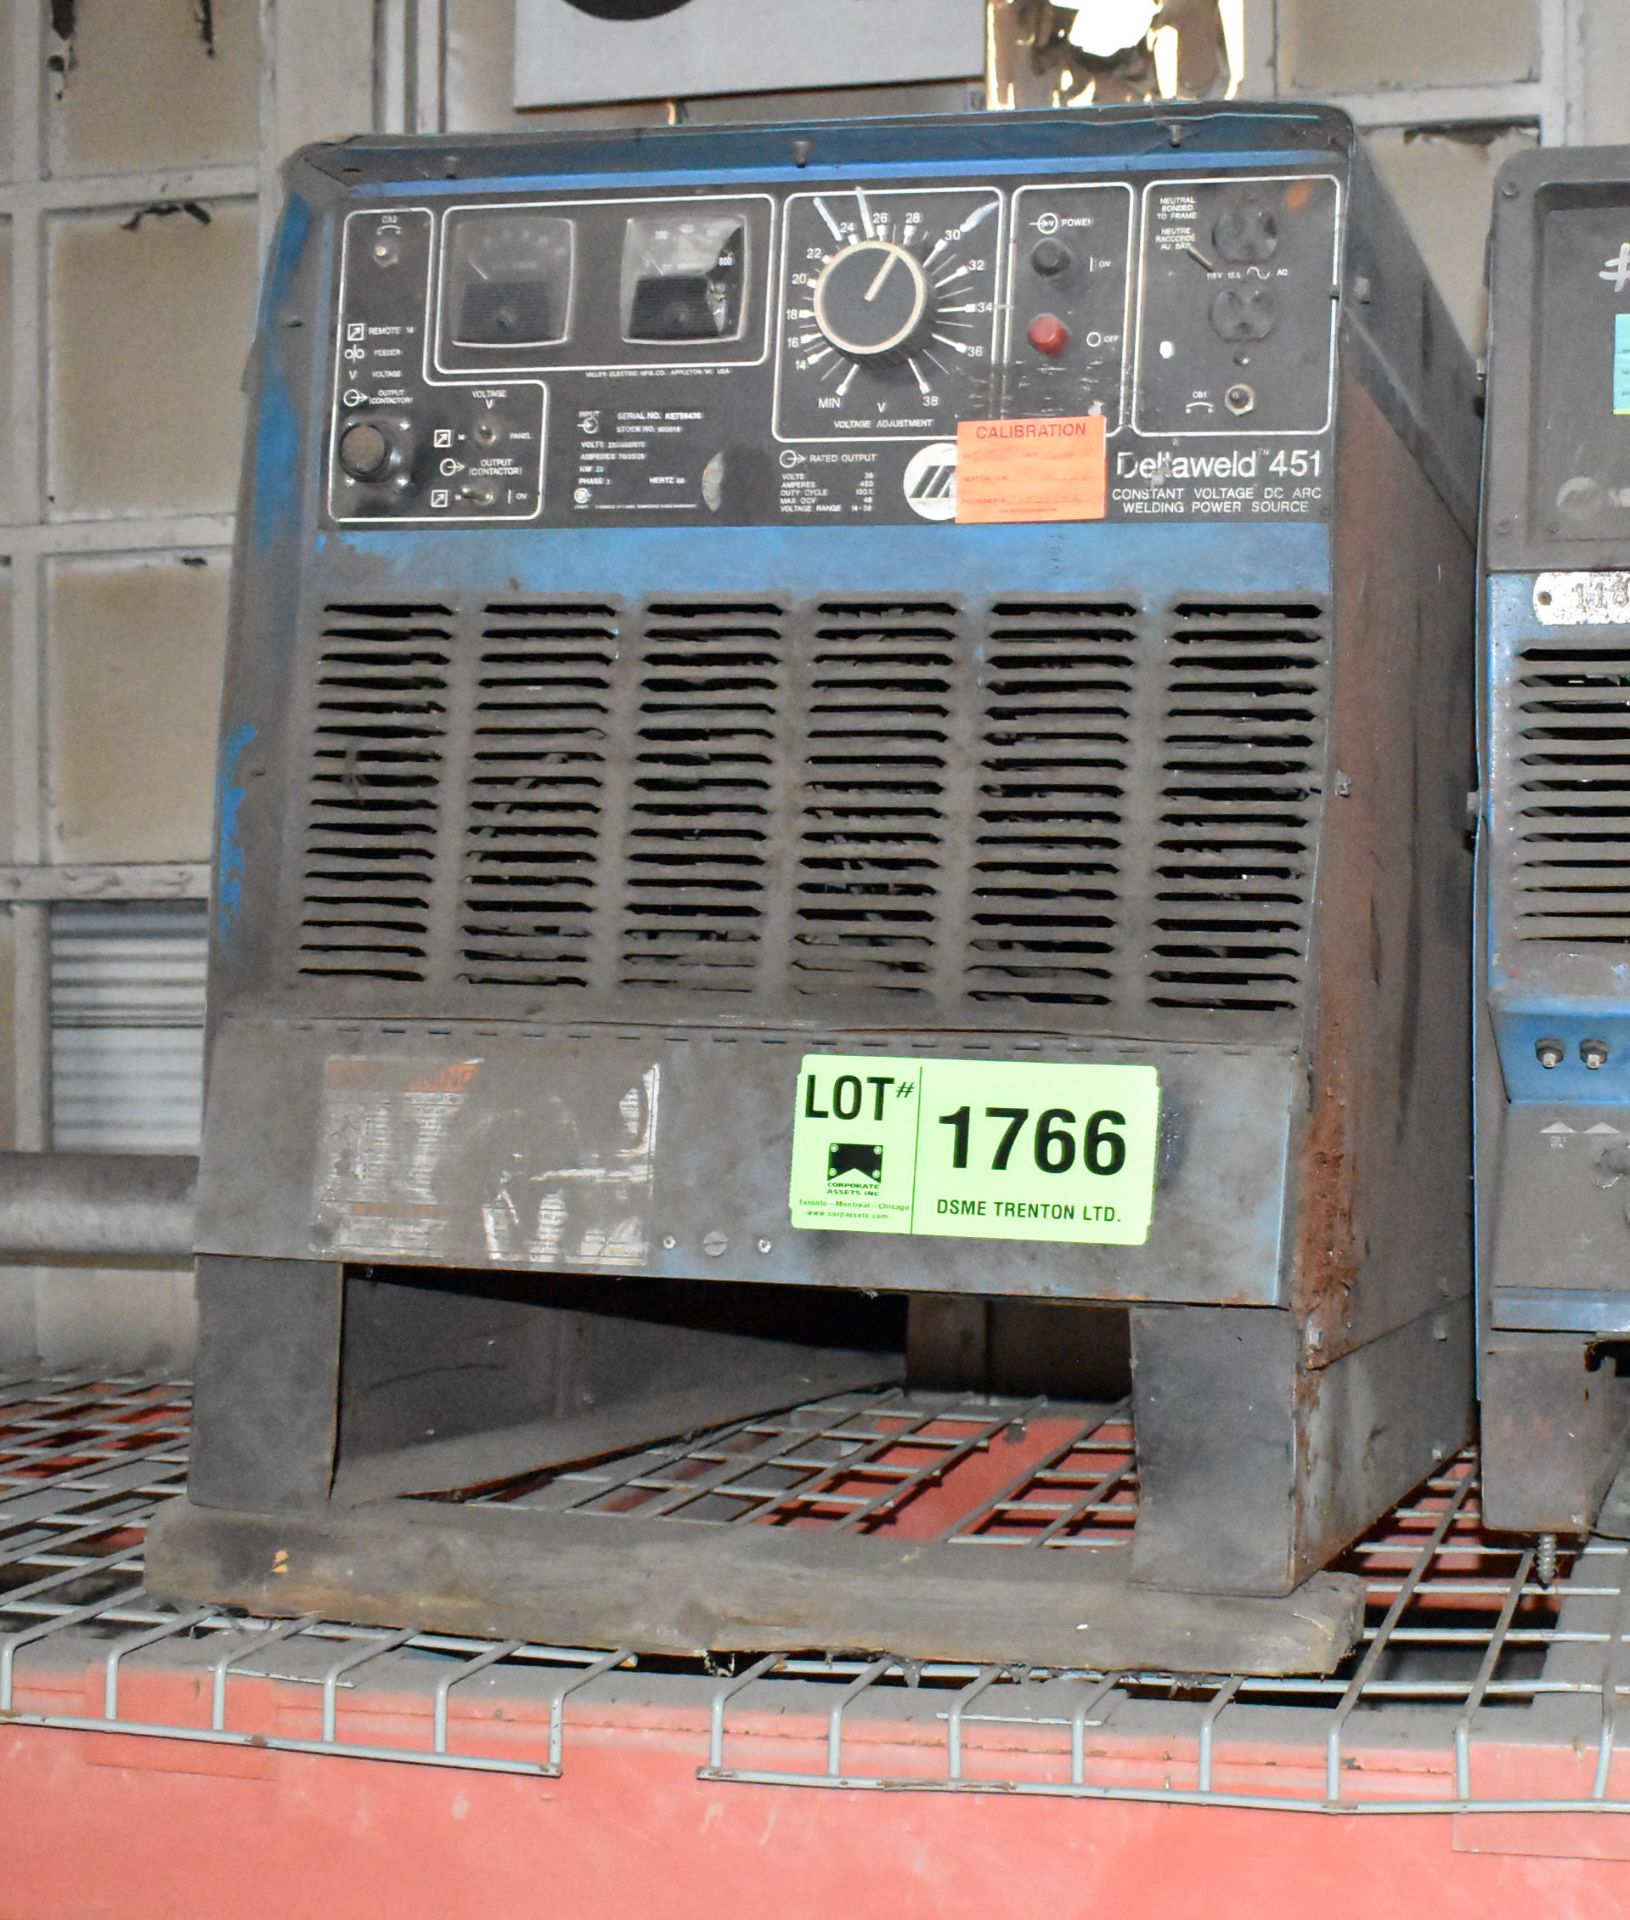 MILLER DELTAWELD 451 WELDING POWER SOURCE [RIGGING FEE FOR LOT# 1766 - $40 USD +PLUS TAXES]